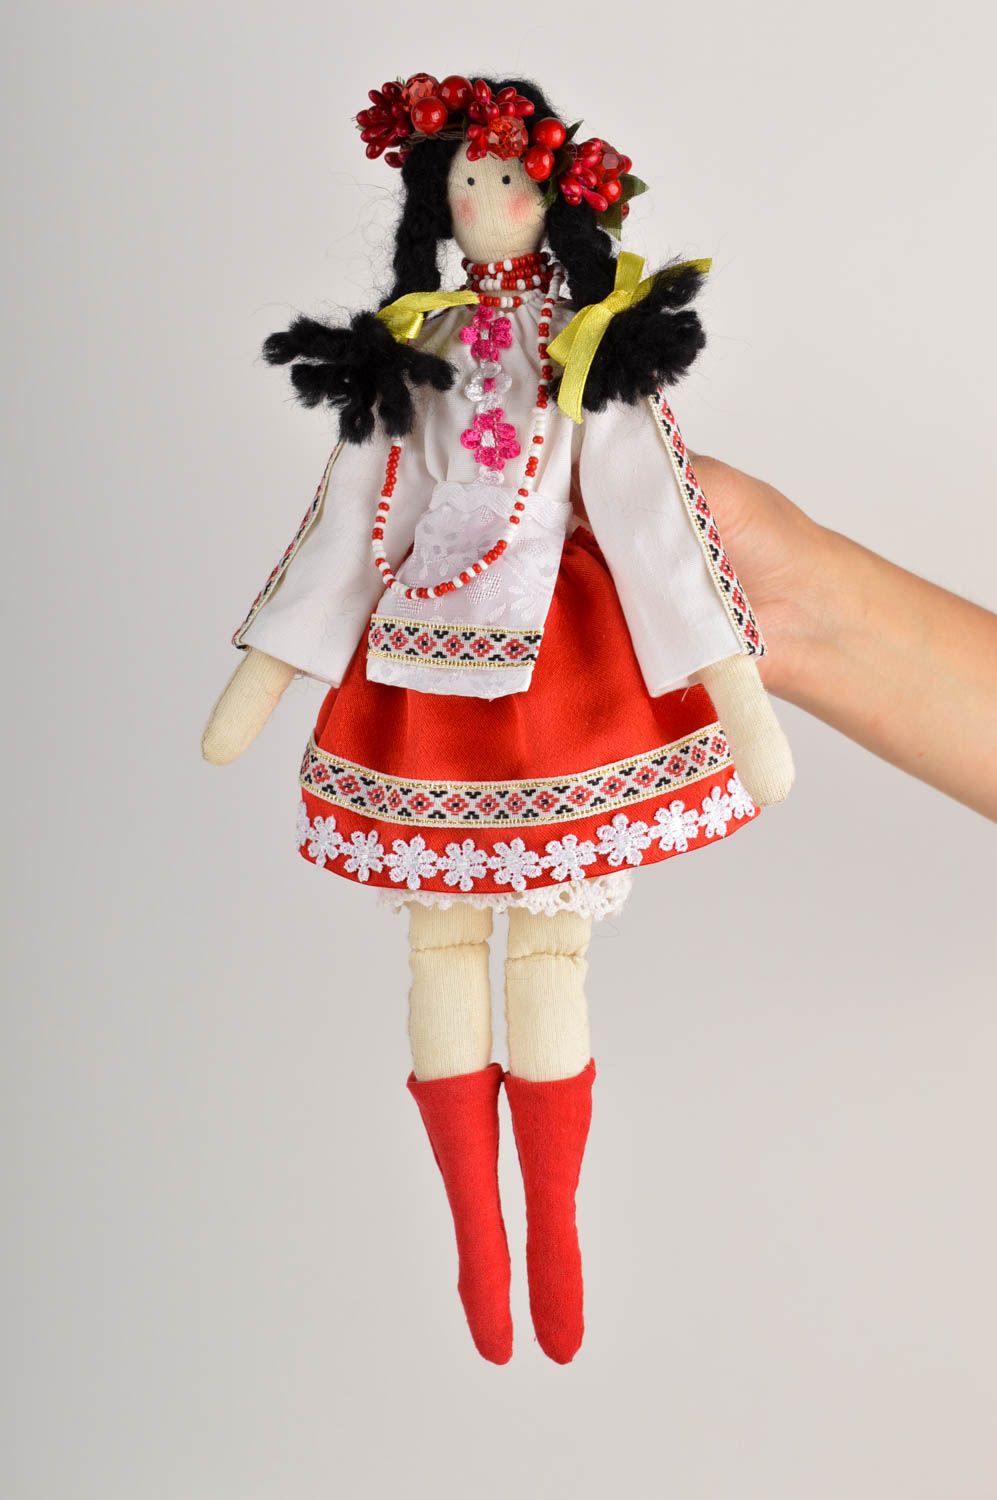 Handmade doll toy in national costume designer childrens toy decoration ideas photo 5